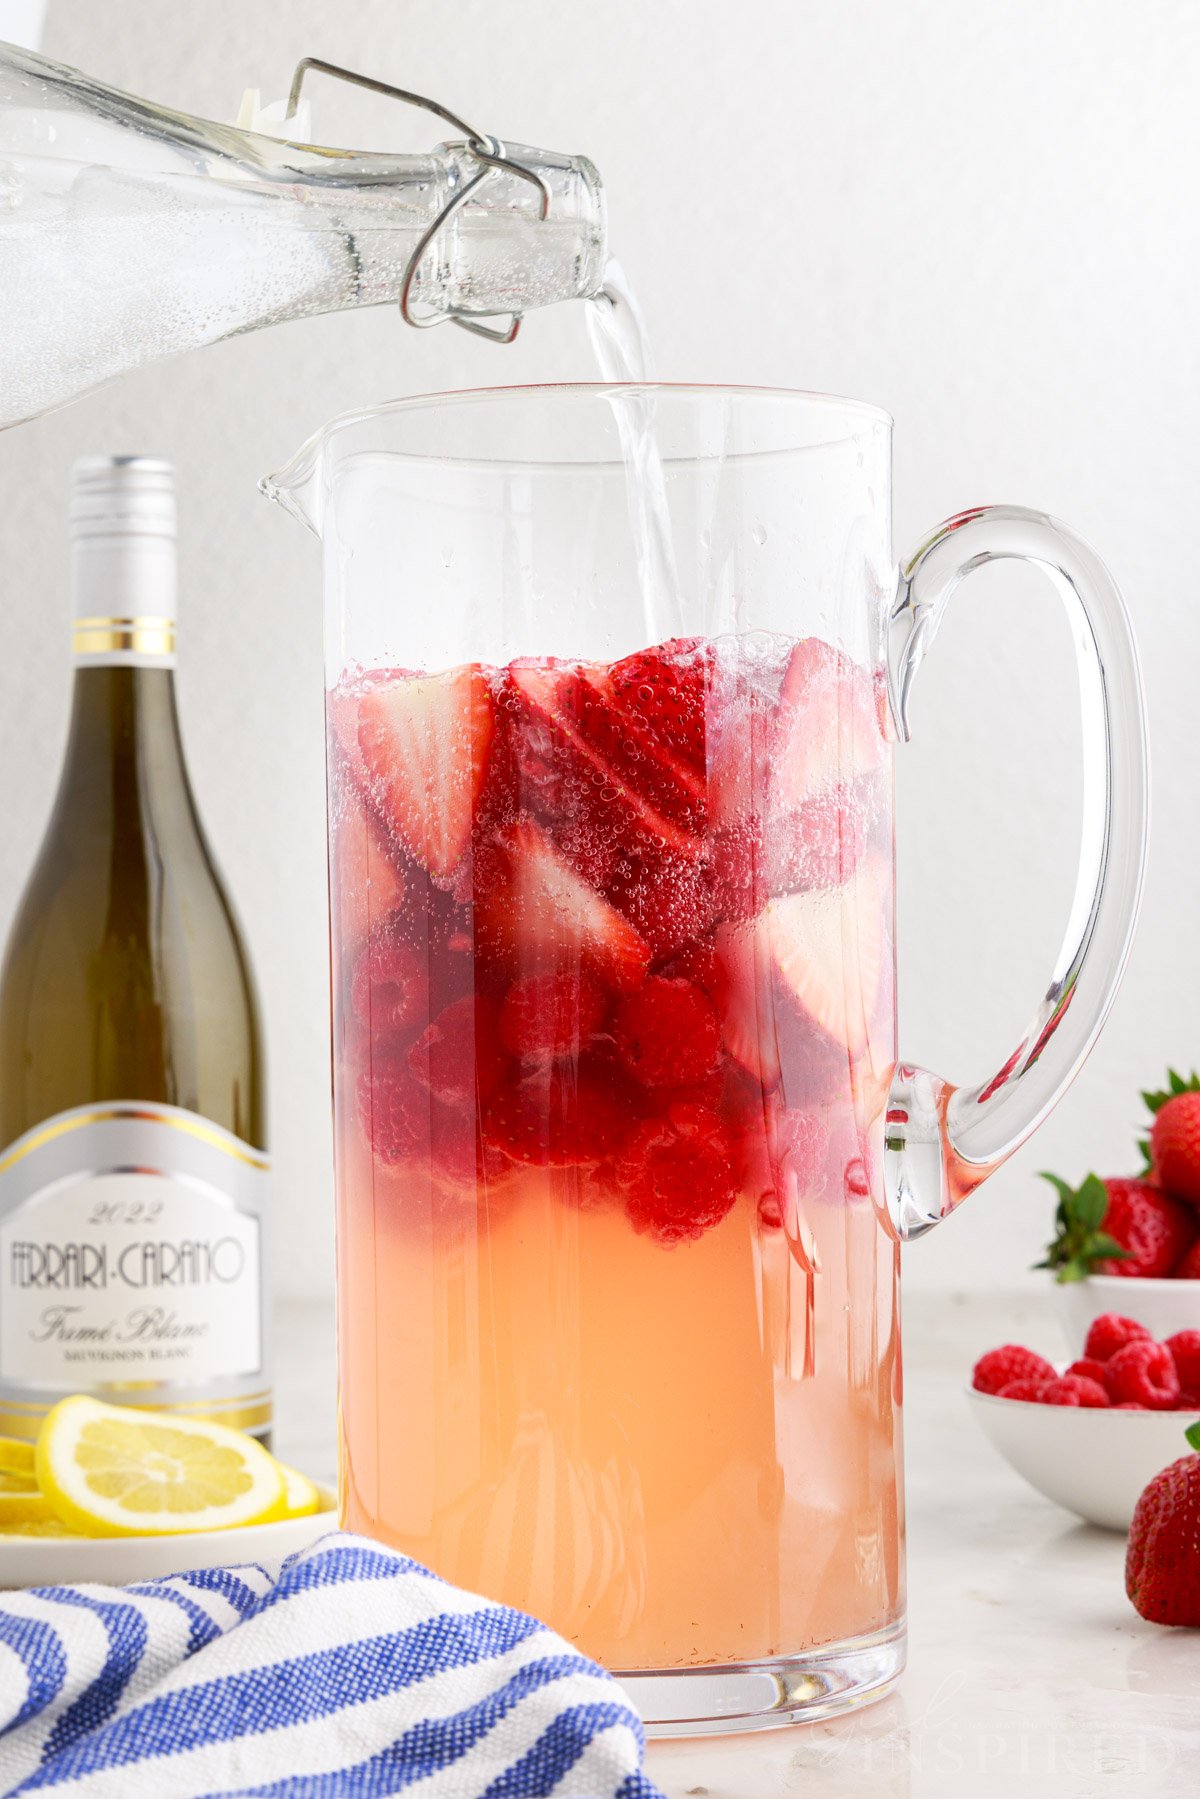 Club soda poured into pitcher with strawberry sangria and fruit.